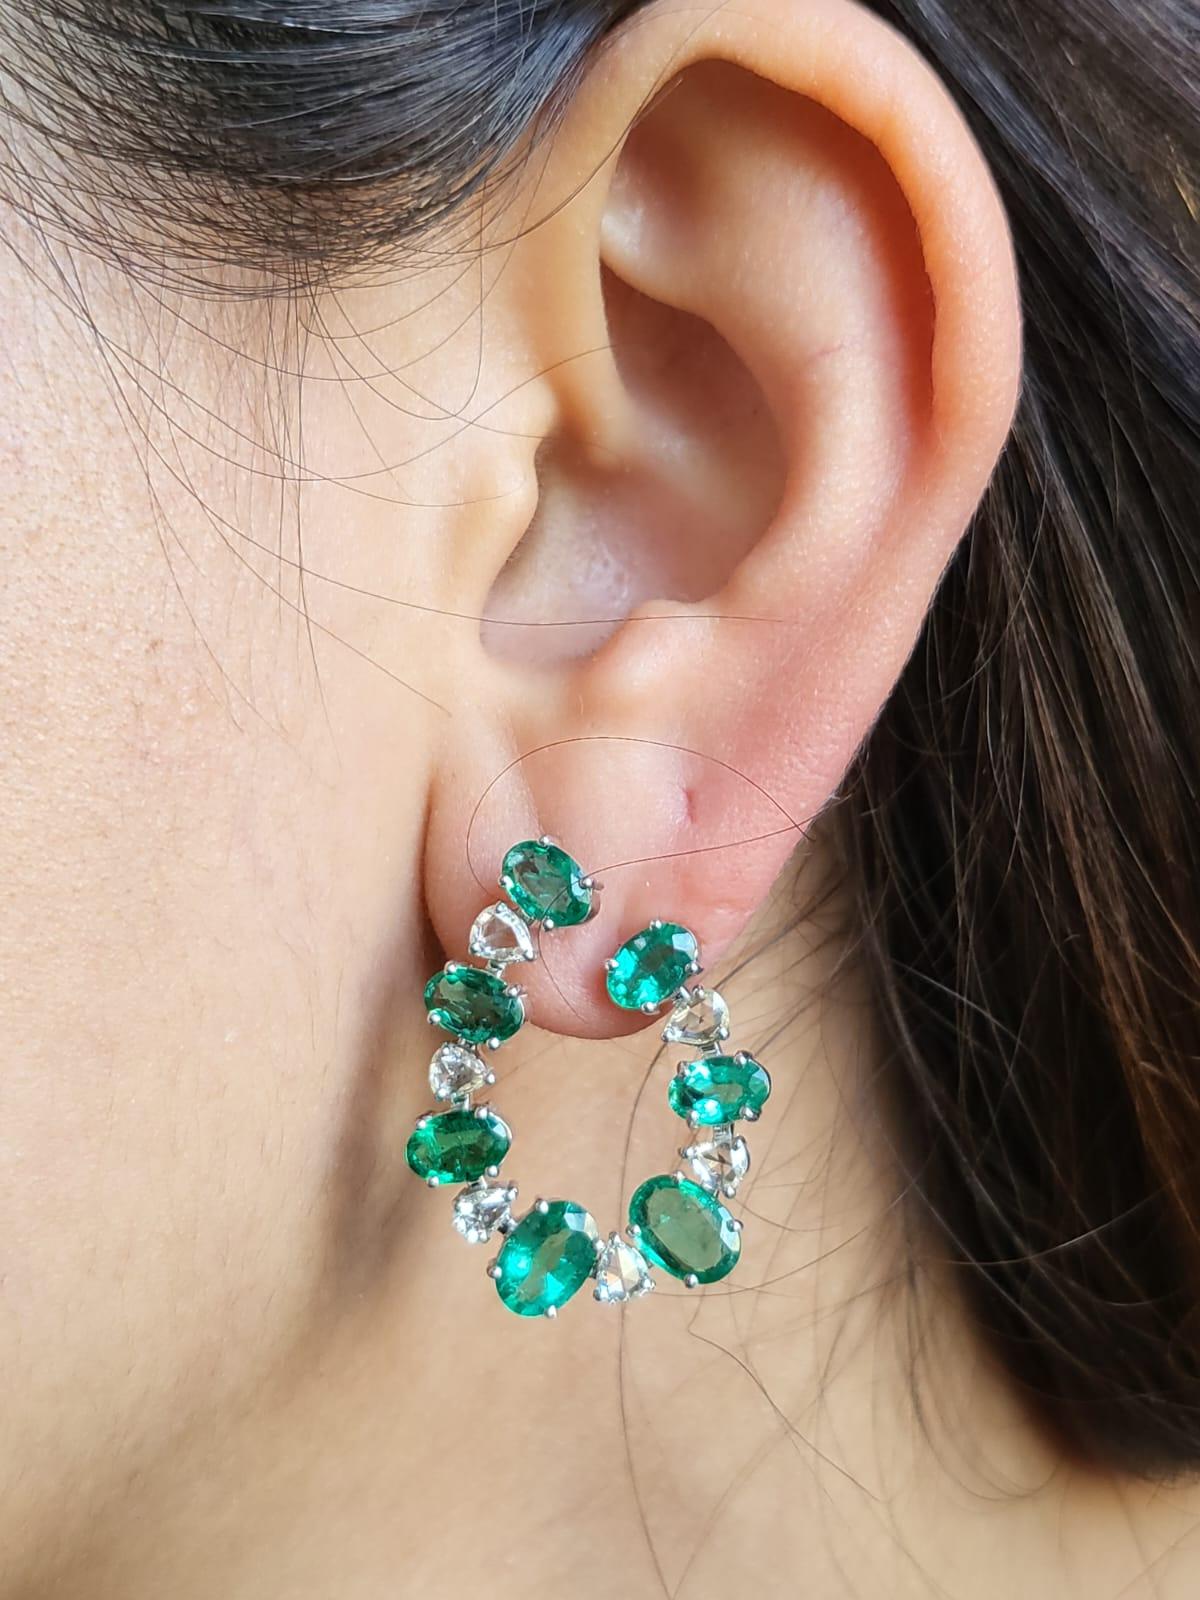 A very beautiful and chic, Emerald Hoop Earrings set in 18K White Gold & Diamonds. The weight of the Emeralds is 6.21 carats. The Emeralds are completely natural, without any treatment and is of Zambian origin. The weight of the Rose Cut Diamonds is